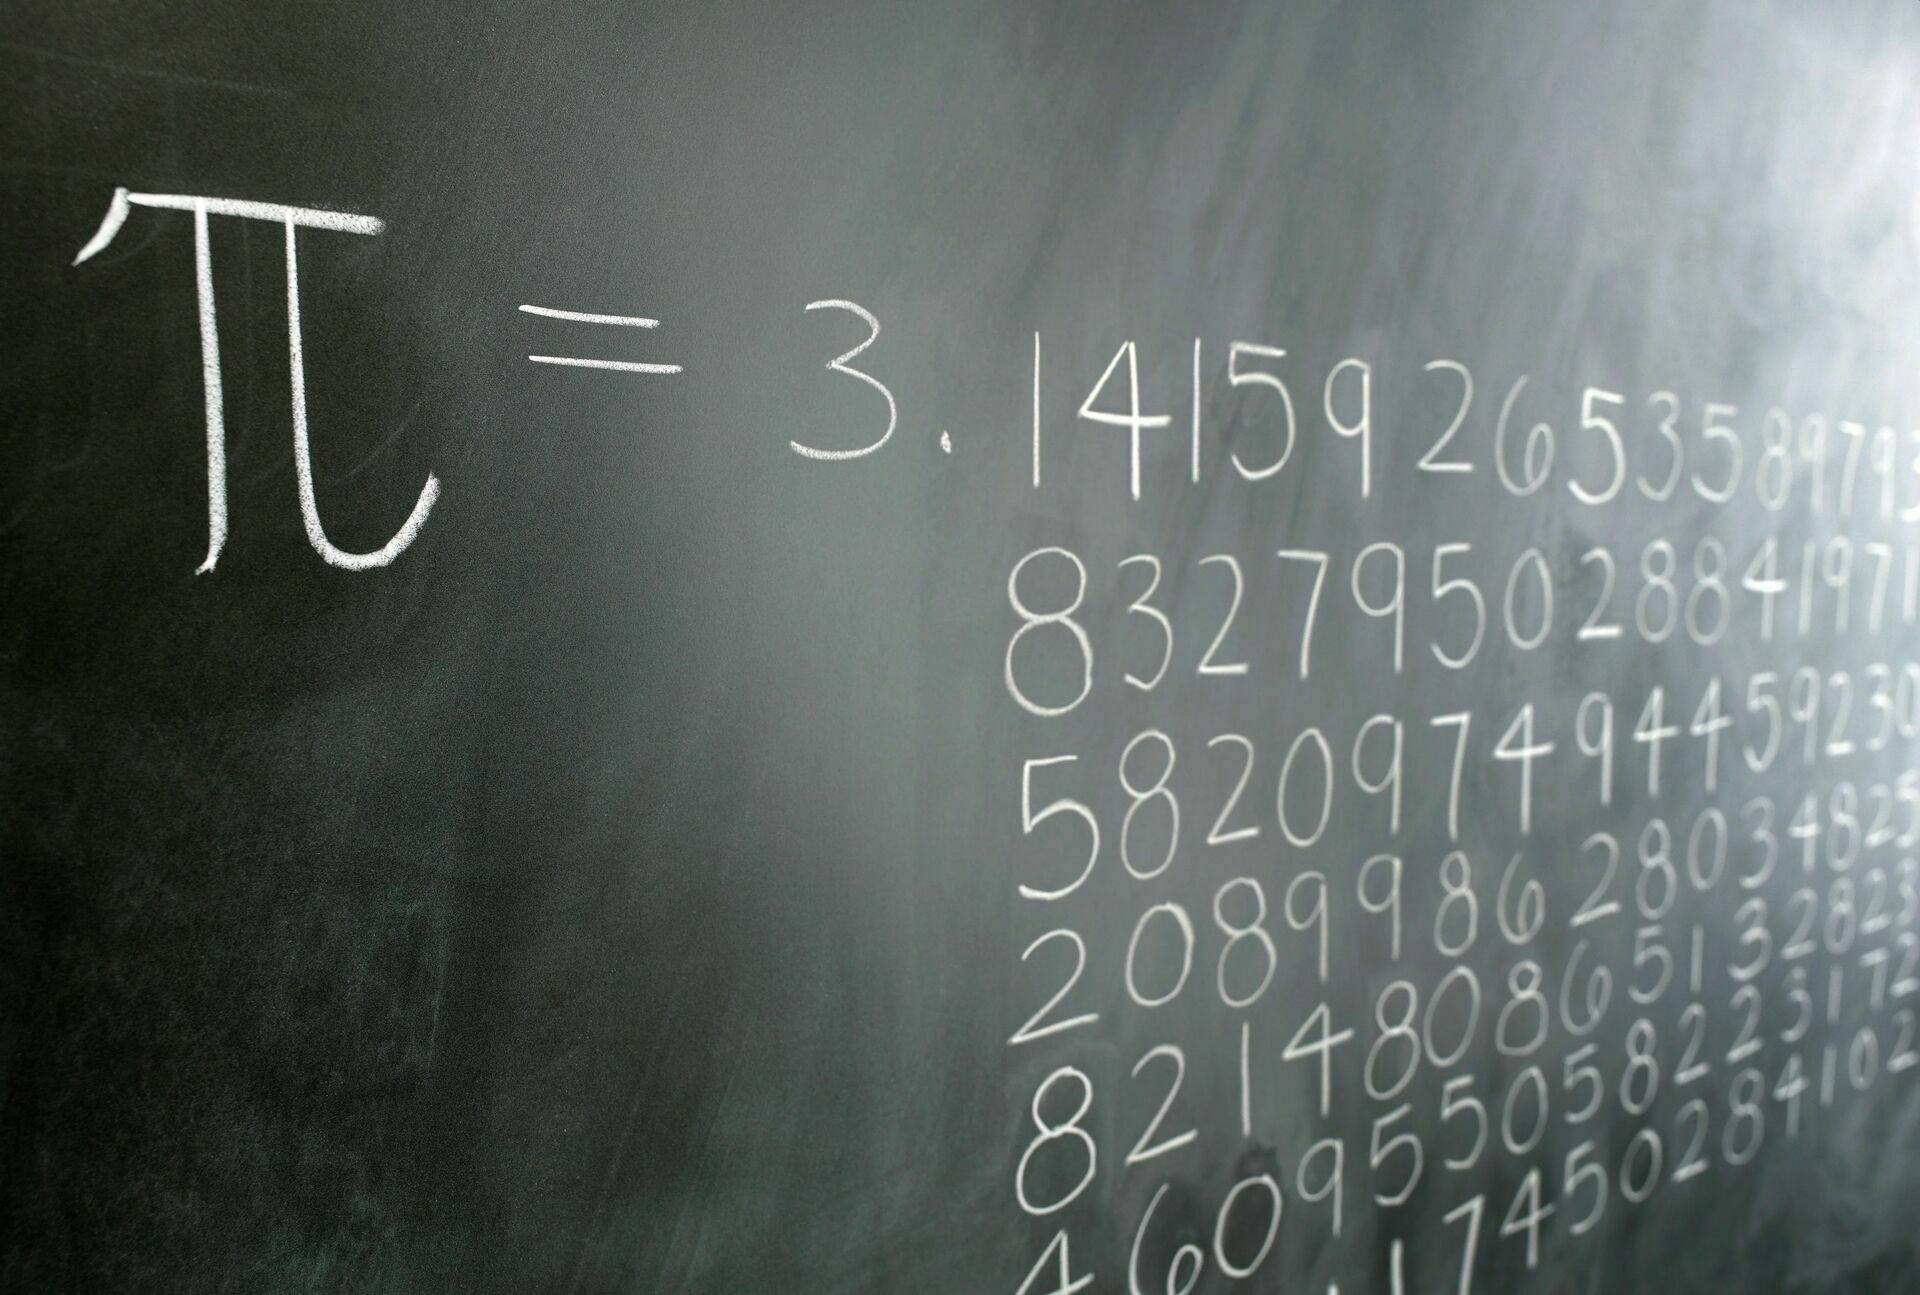 Here is a record: the number Pi was calculated with an accuracy of 62 trillion characters